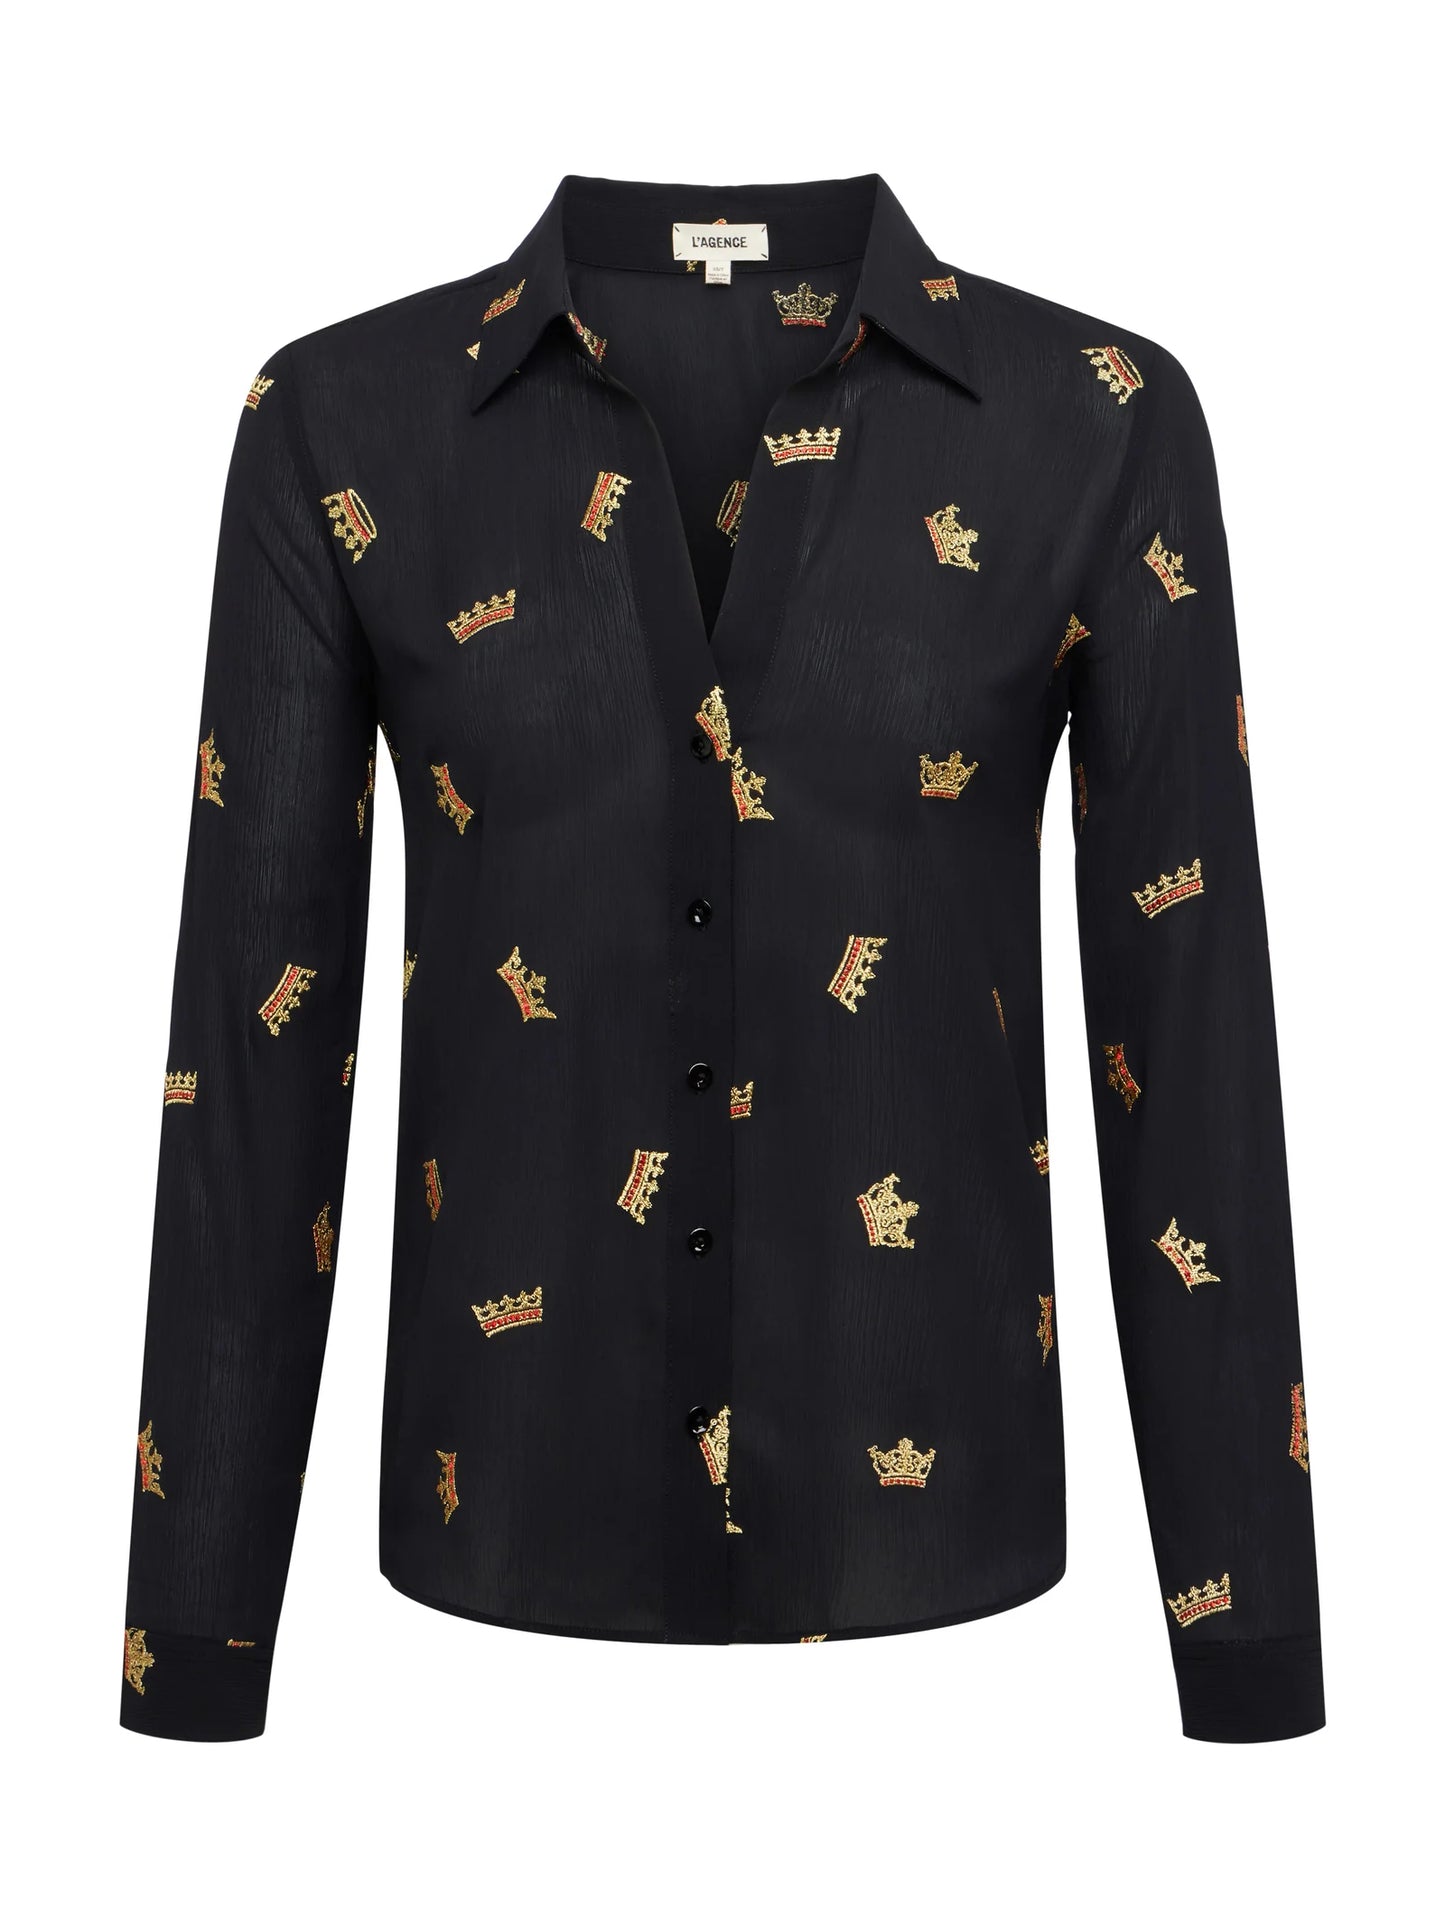 Laurent Blouse Black Gold Crown Embroidery - L'AGENCE